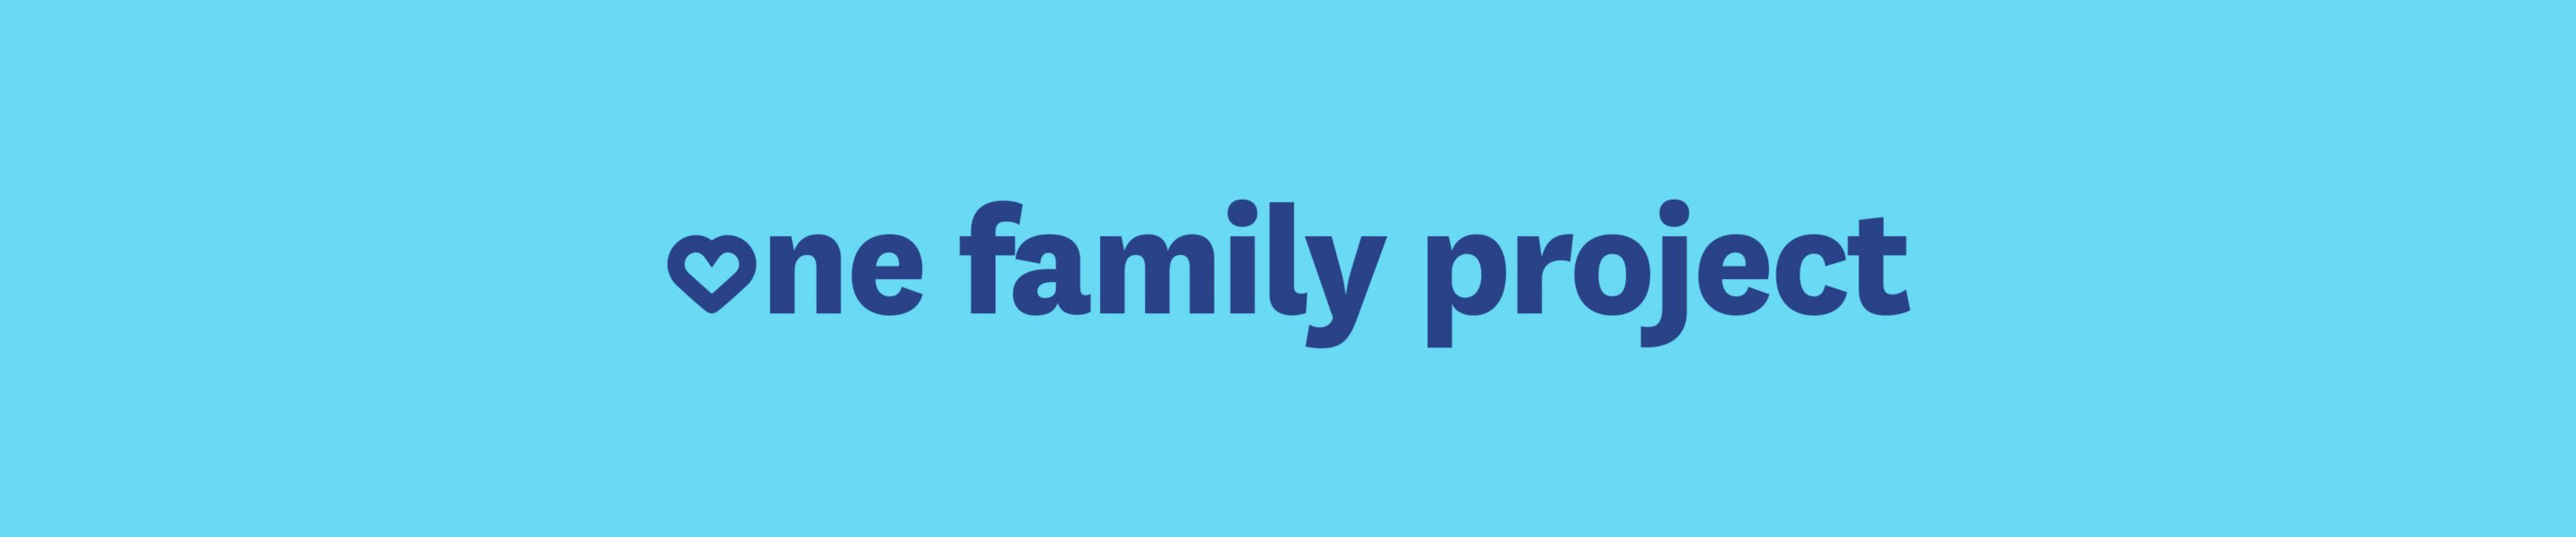 a one family project banner